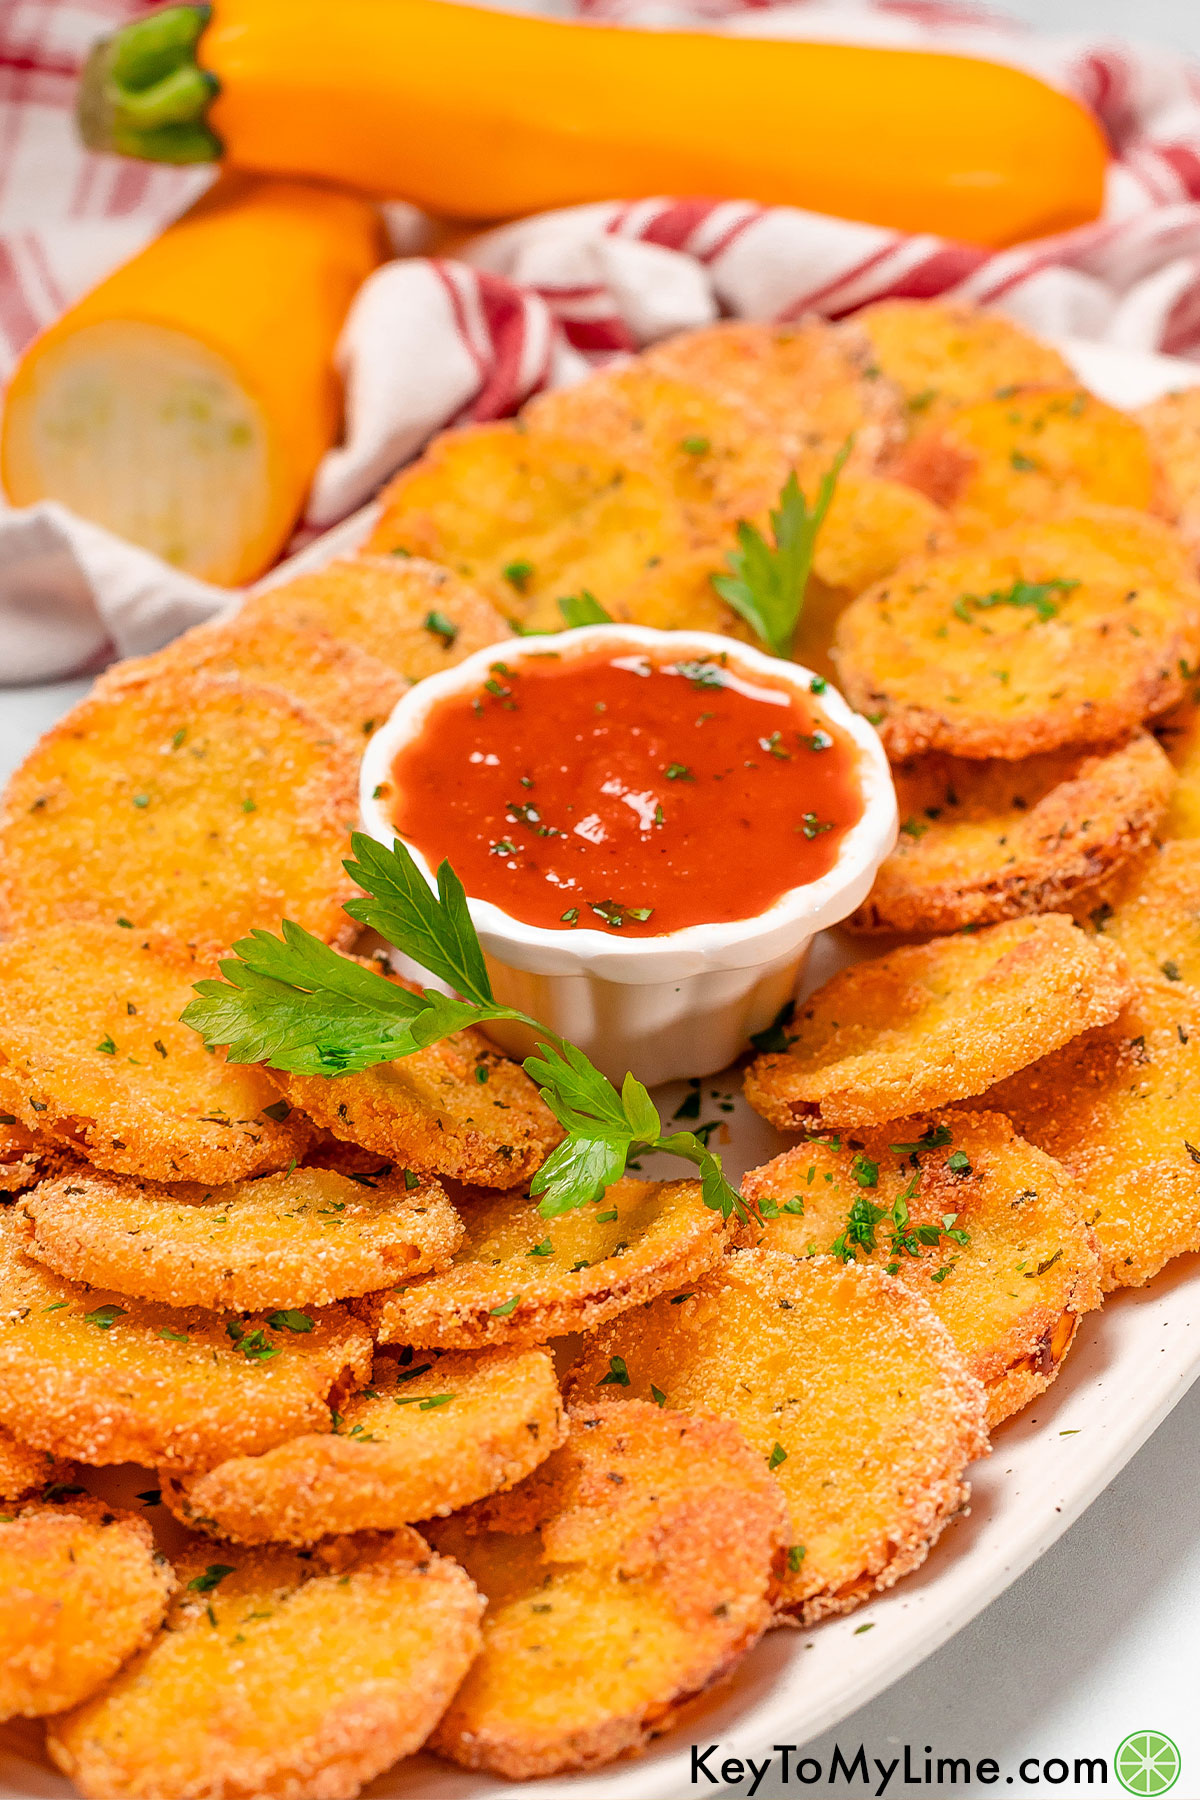 A side image of a platter with multiple layers of fried squash.